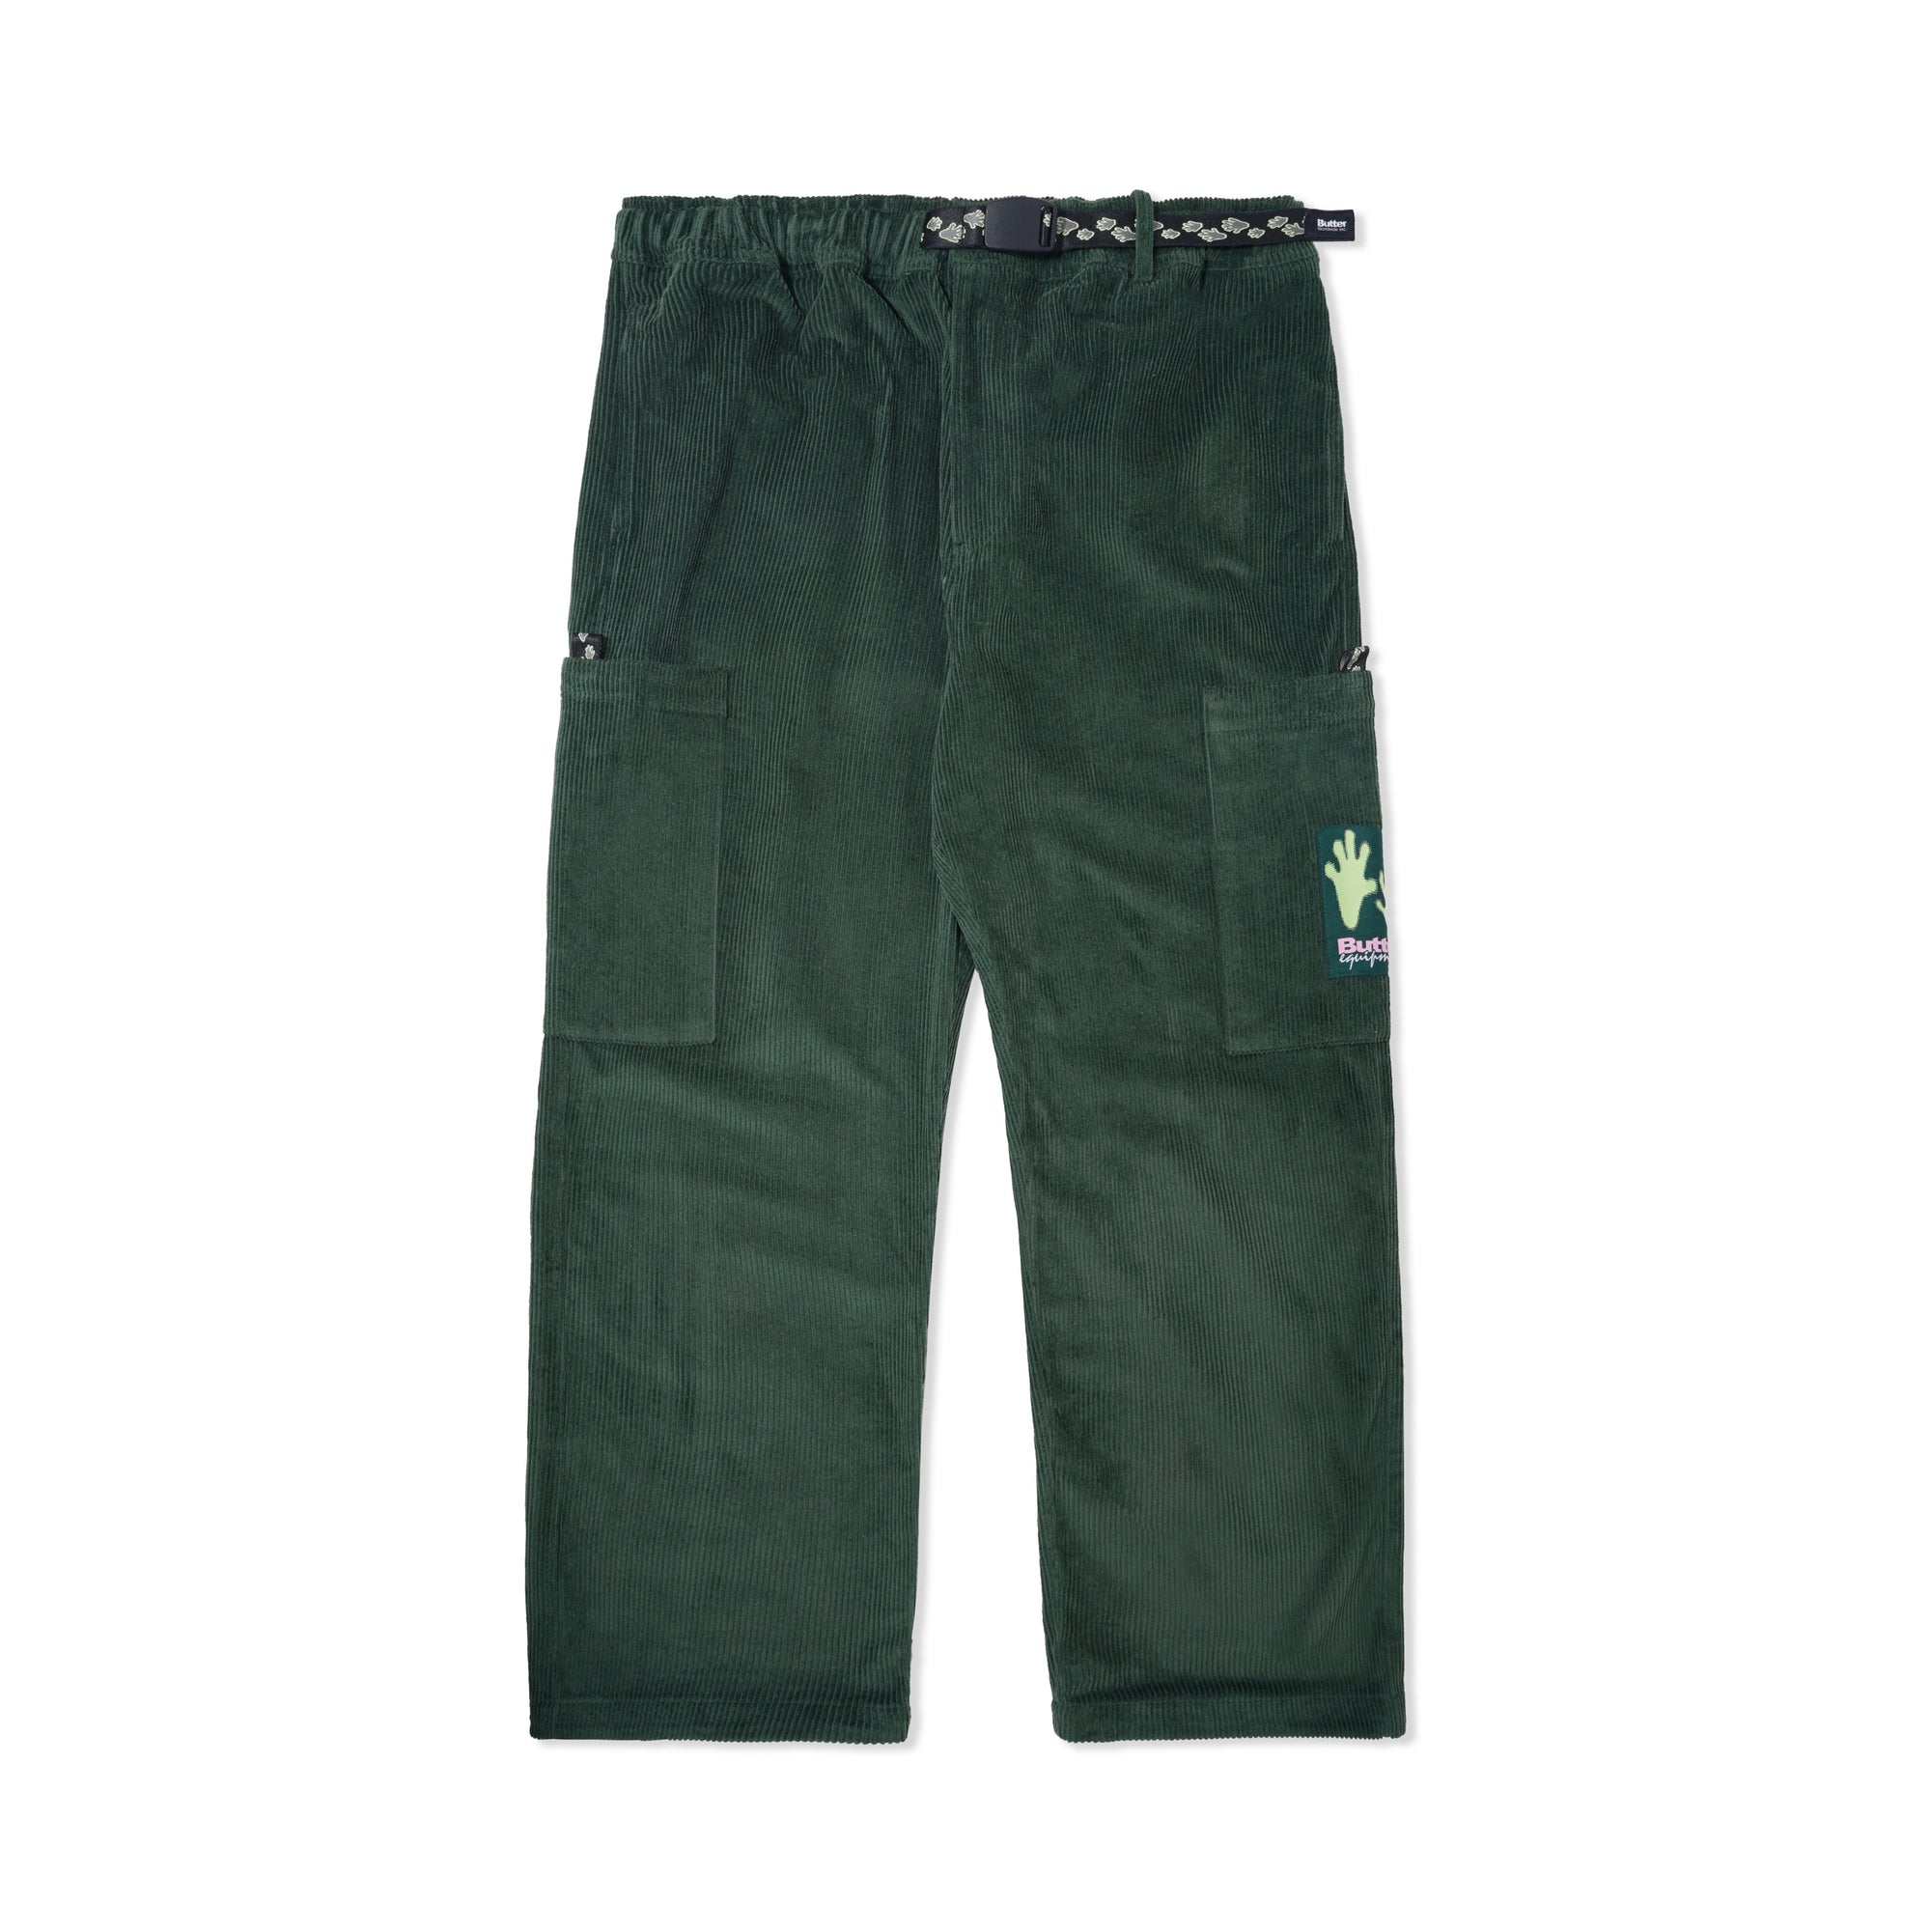 Butter Goods Corduroy Cargo Pants Forest